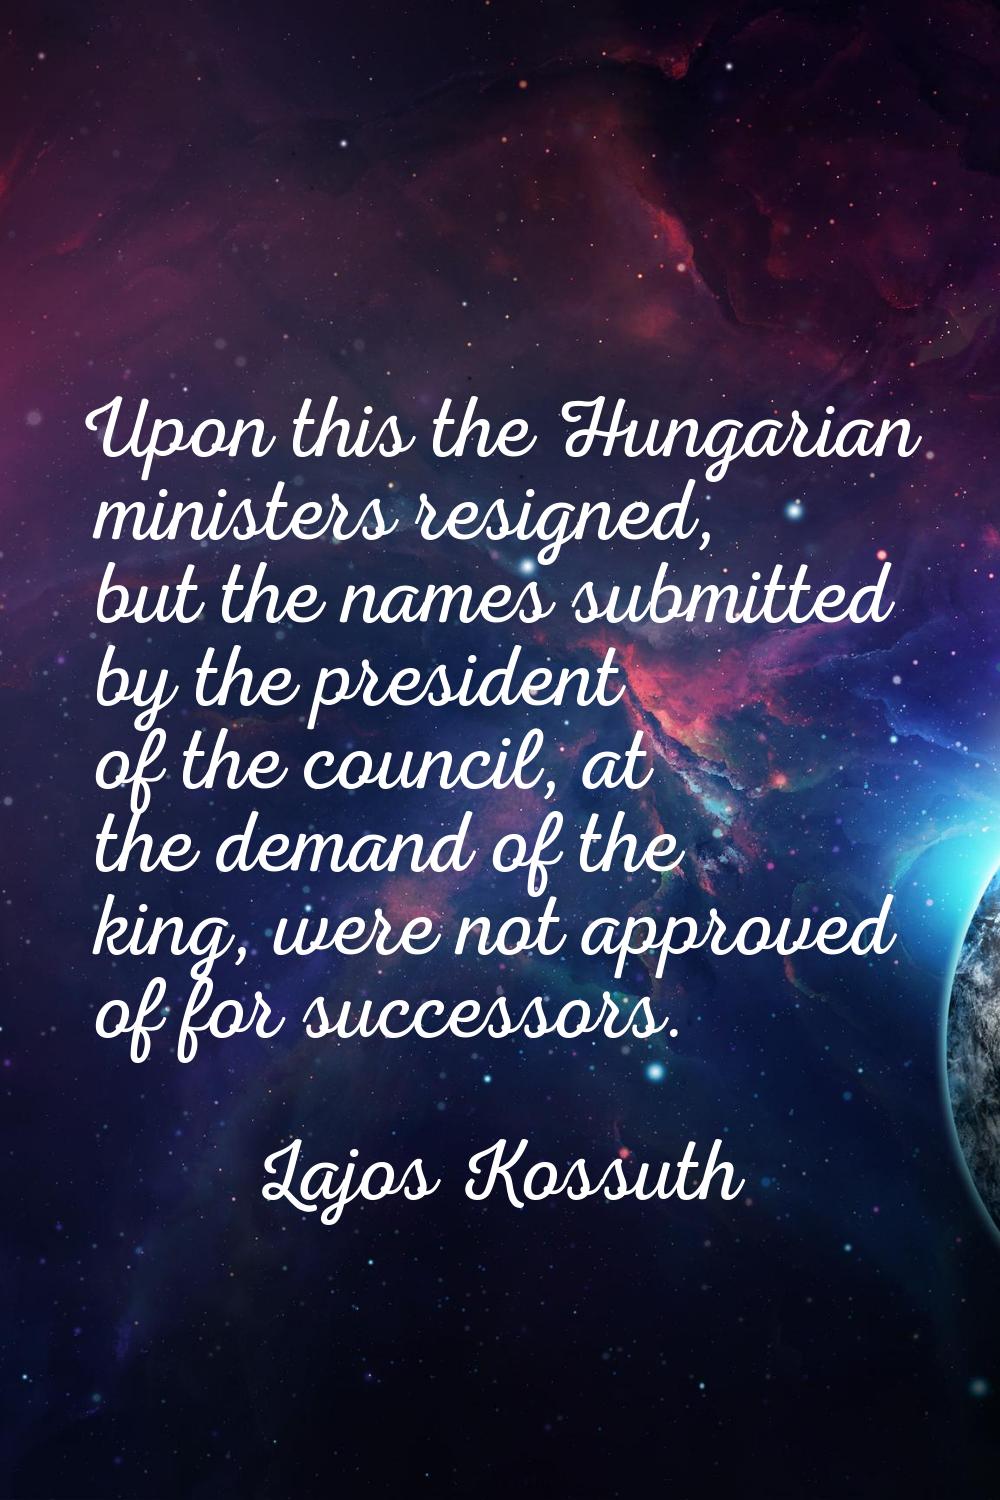 Upon this the Hungarian ministers resigned, but the names submitted by the president of the council